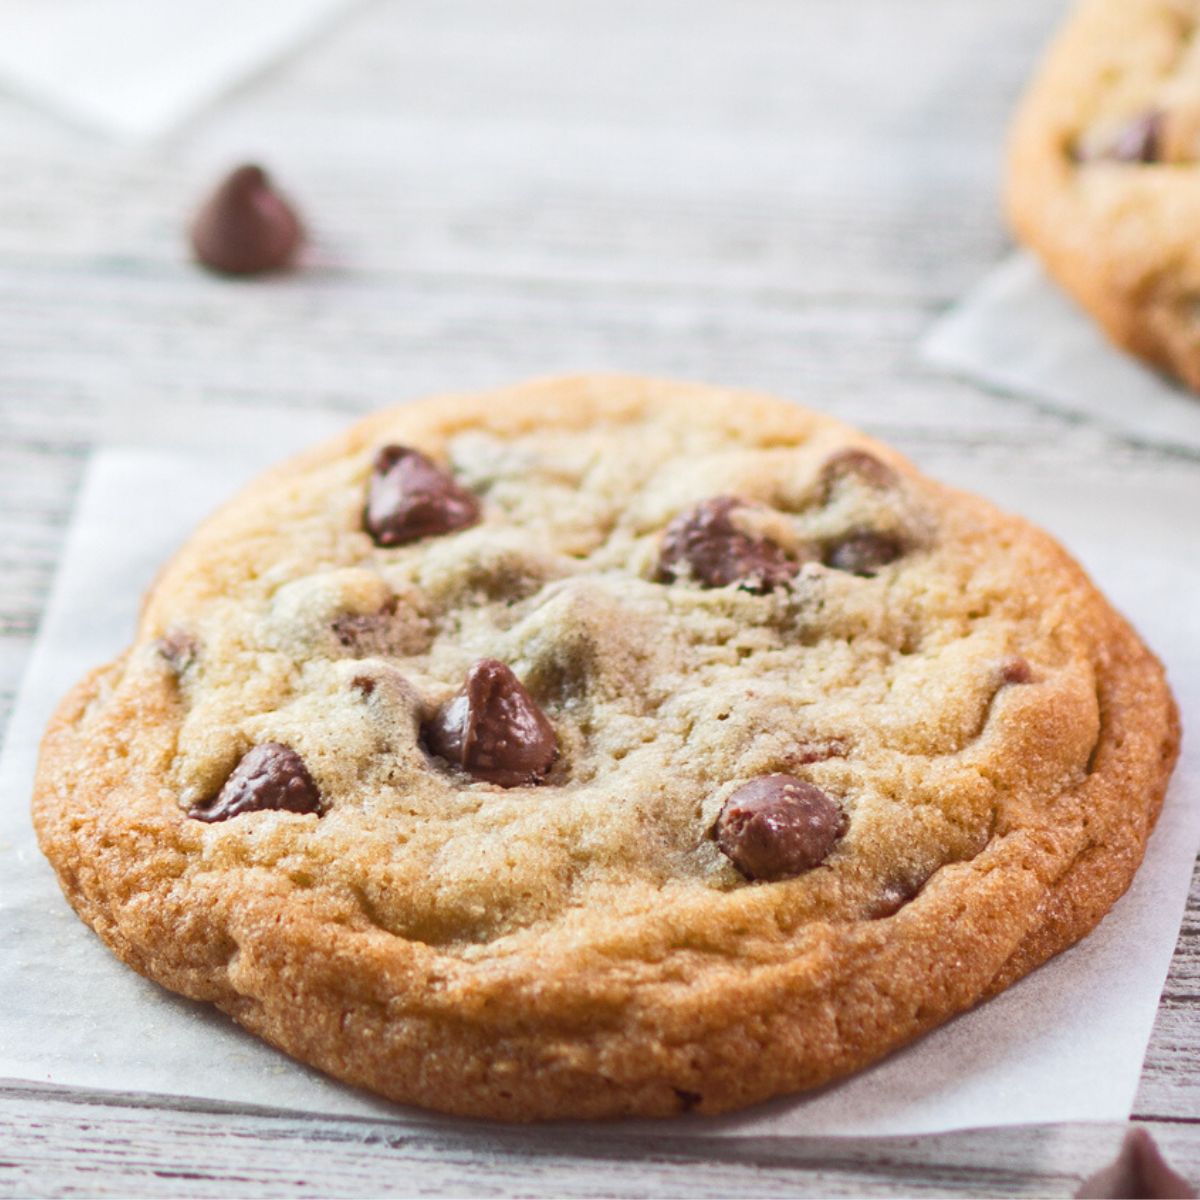 Square image of a chocolate chip cookie.